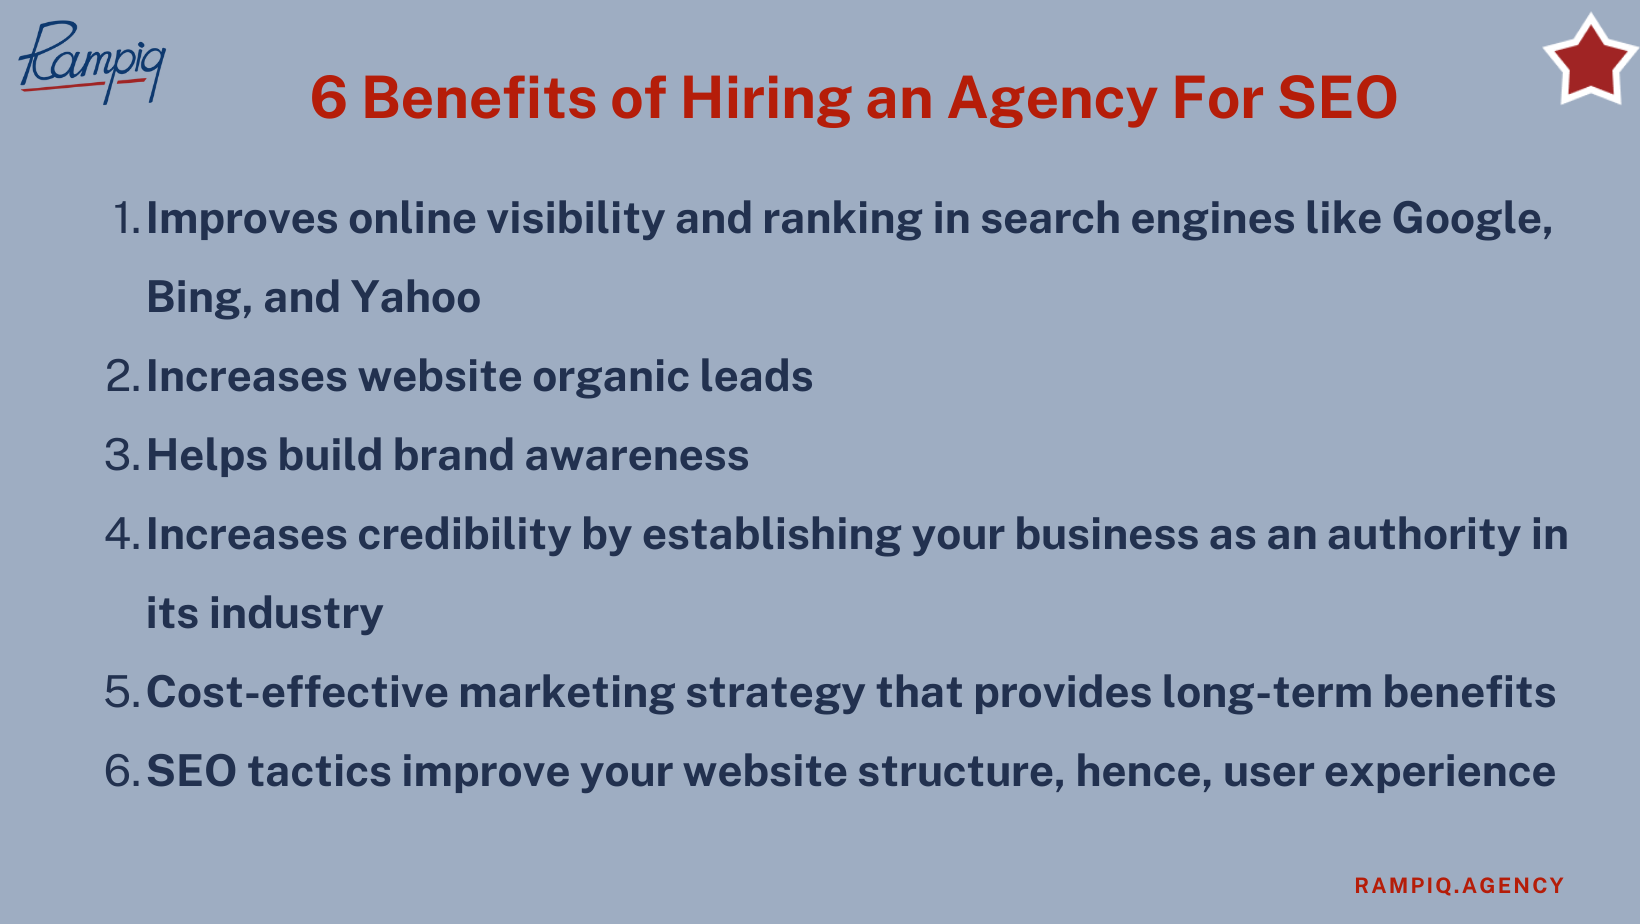 6 Benefits of Hiring an Agency For SEO